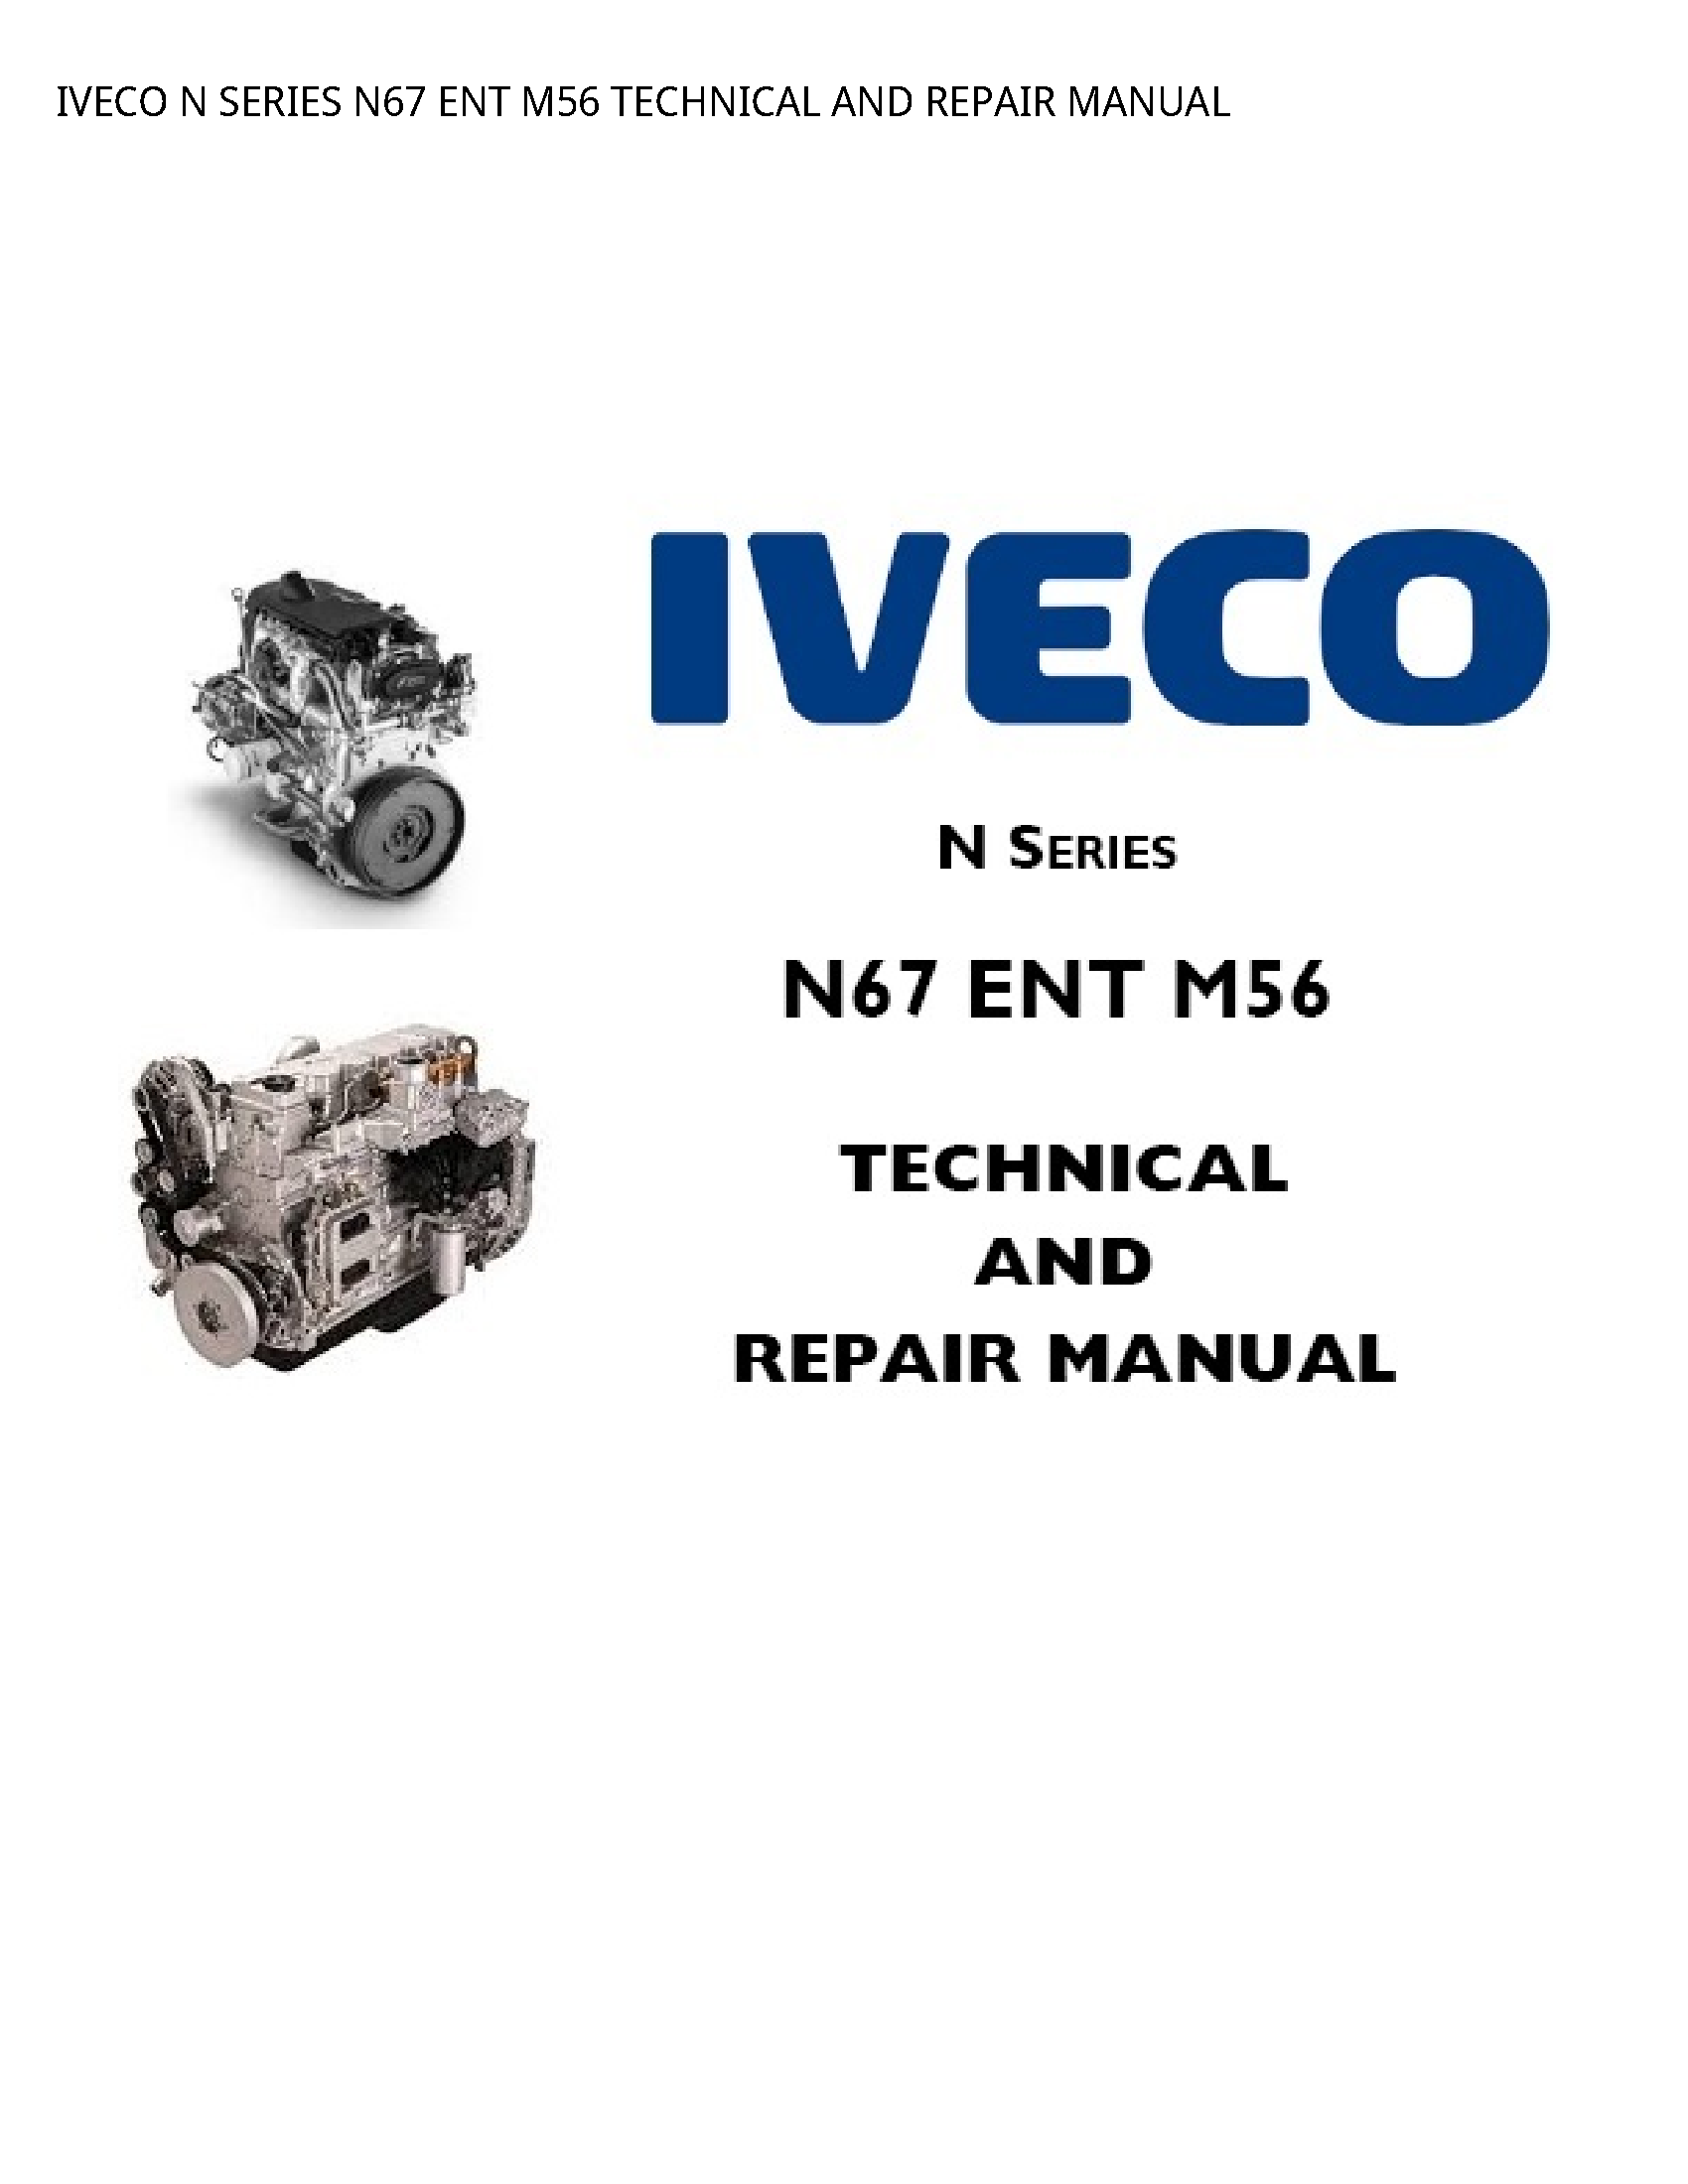 Iveco N67 SERIES ENT TECHNICAL AND REPAIR manual